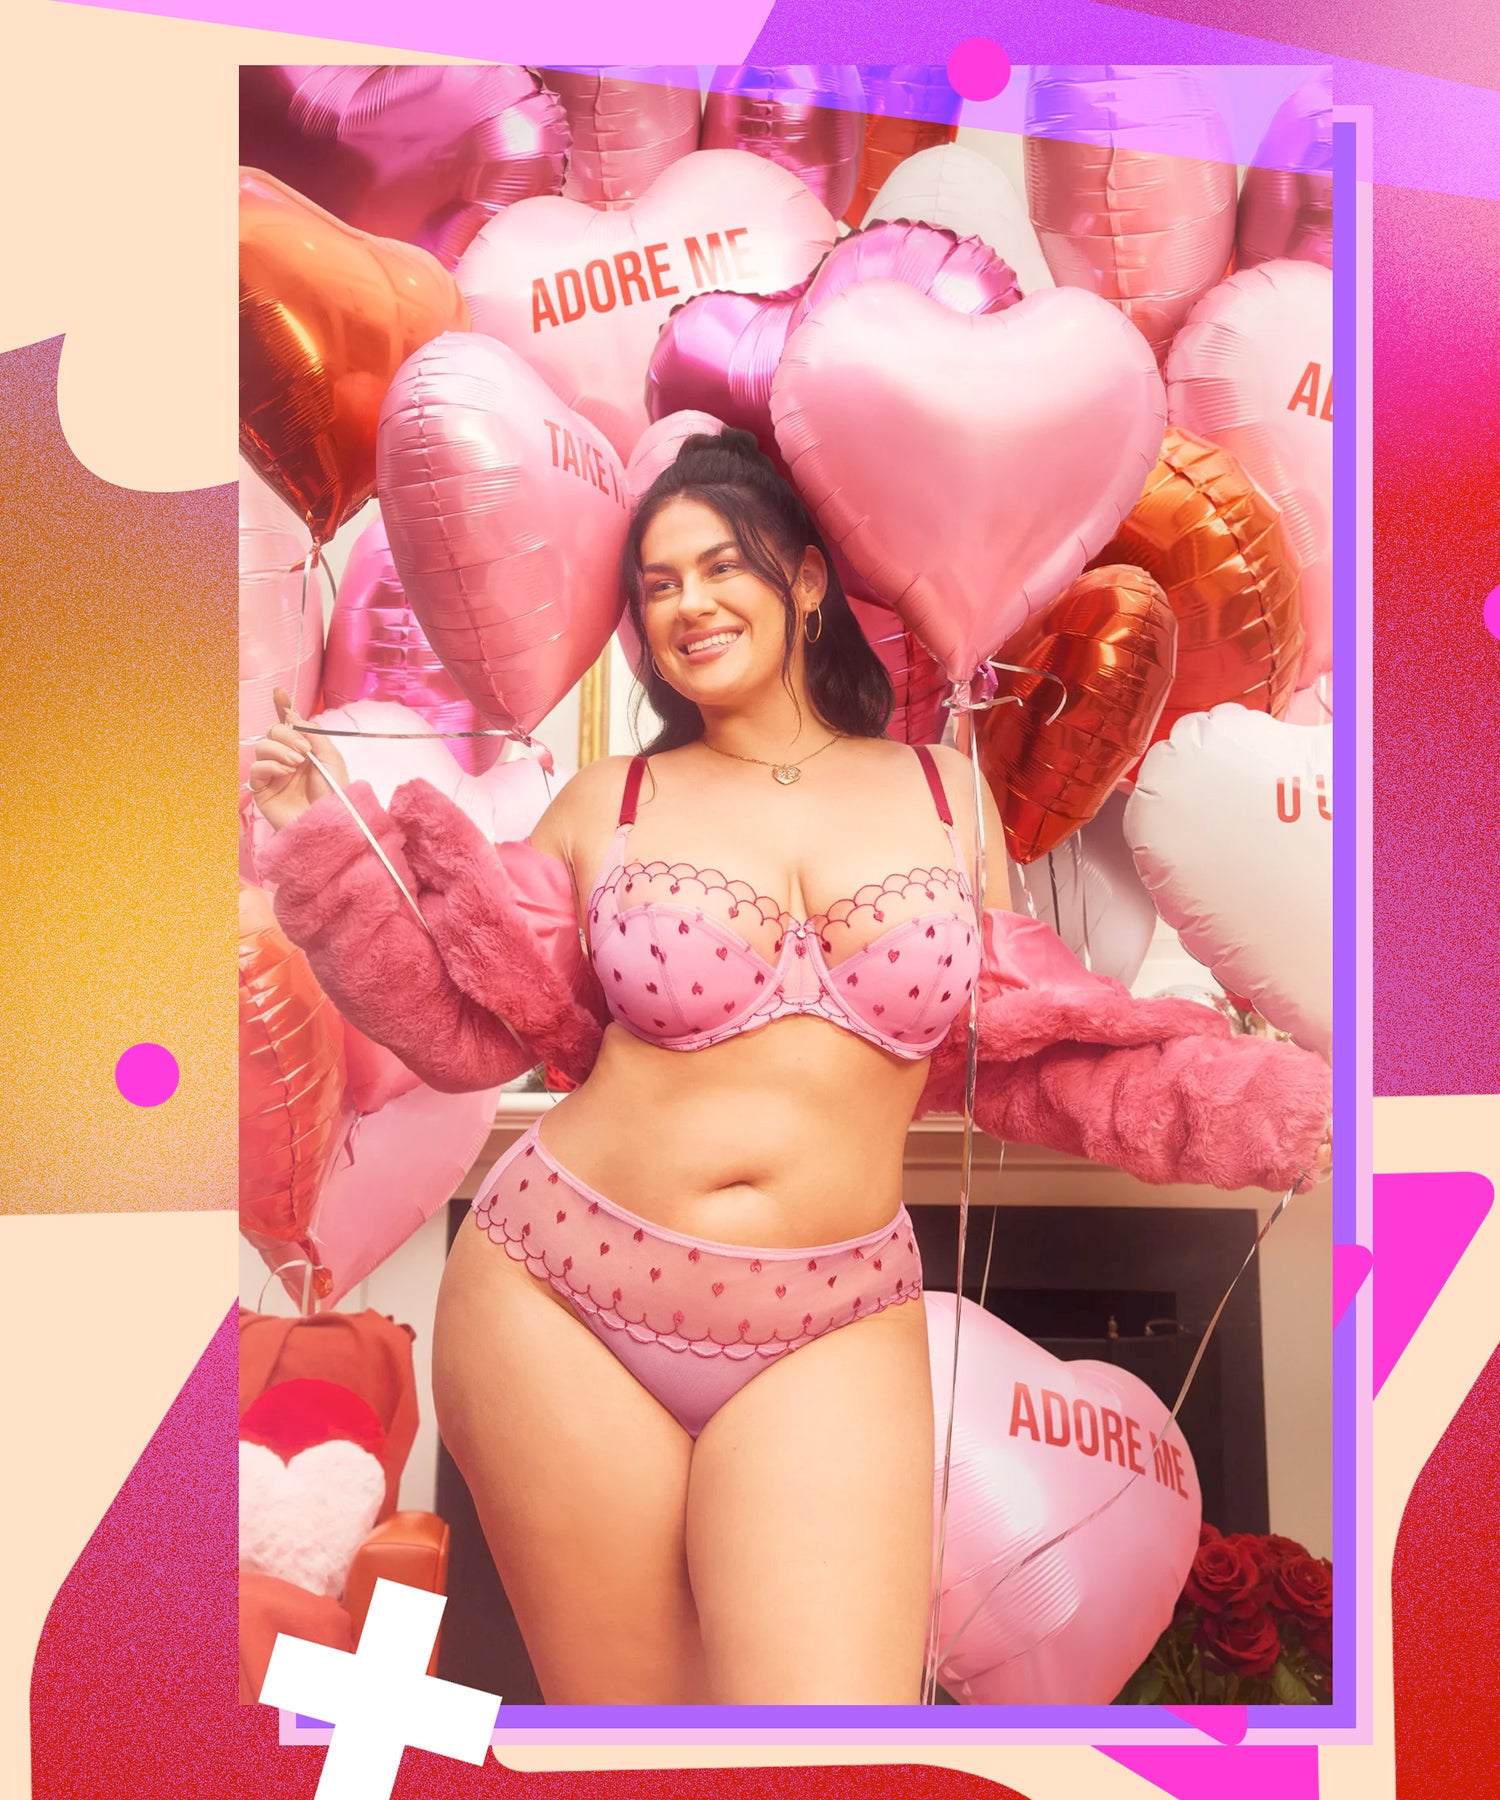 Get daring with some risqué new lingerie this Valentine's Day